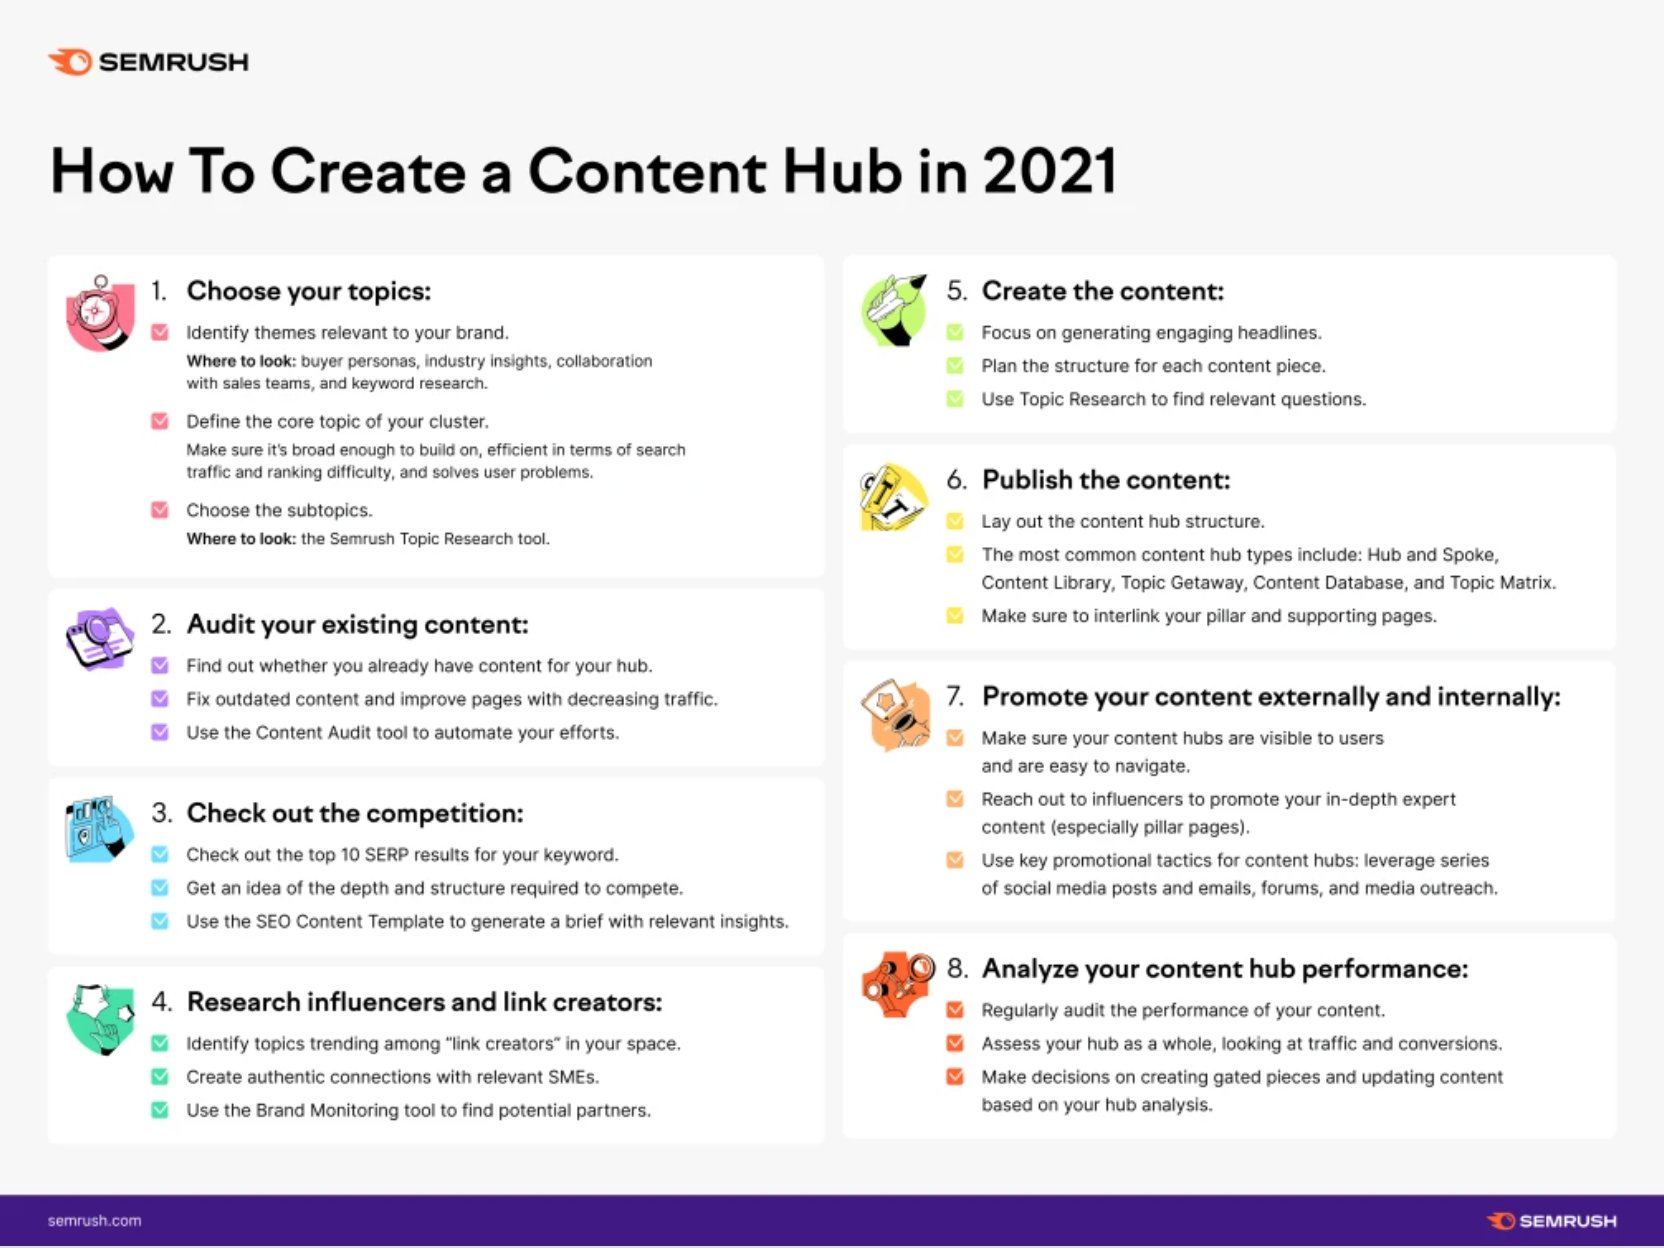 How to create a Content Hub in 2021